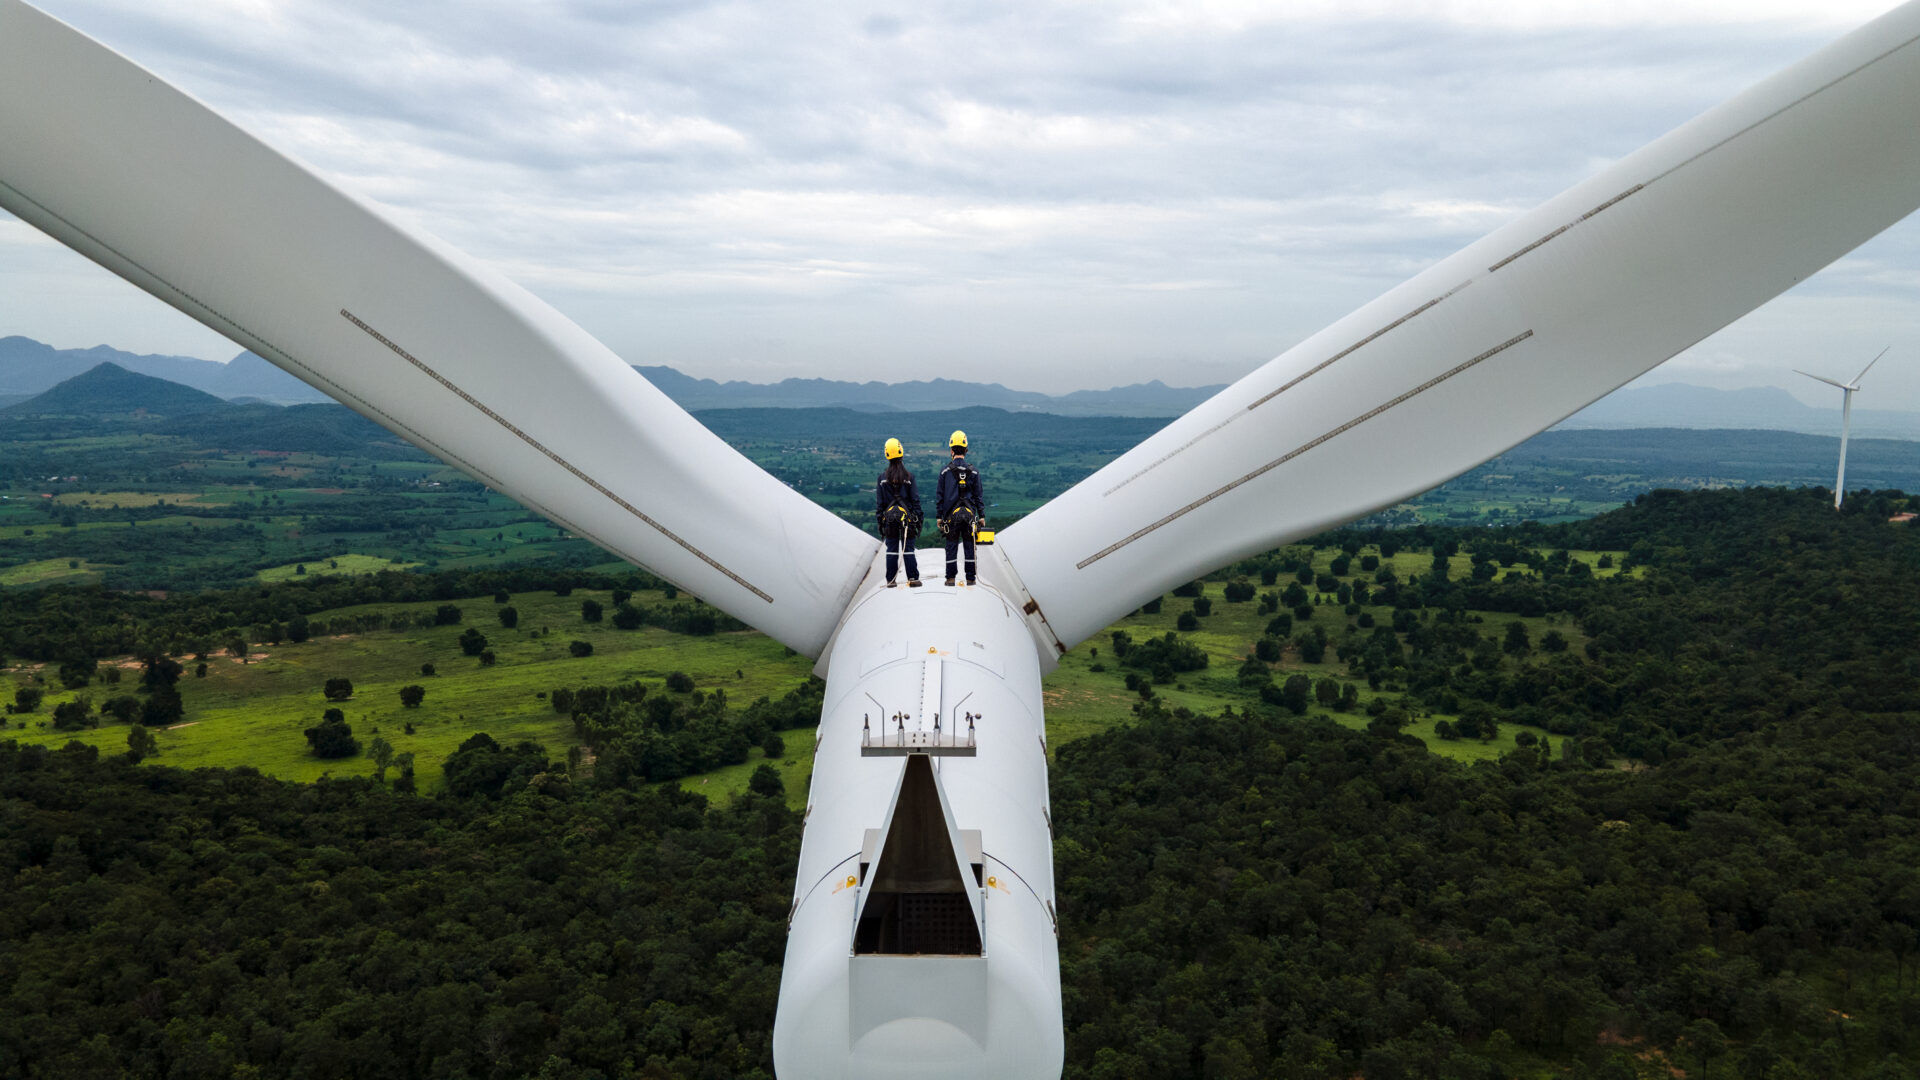 Two Electric engineer wearing Personal protective equipment working on top of wind turbine farm.